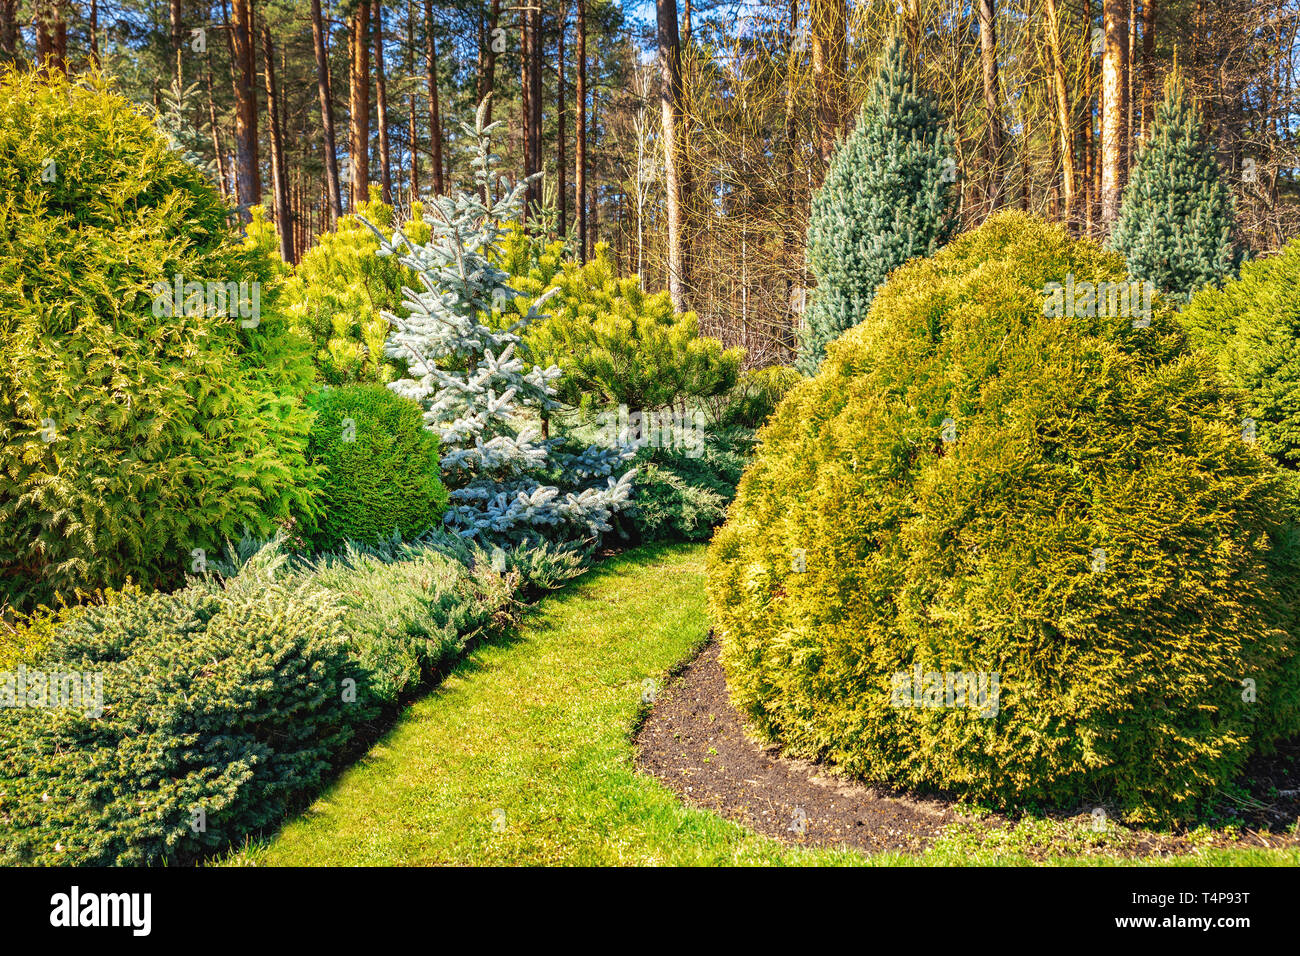 beautiful ornamental landscaped garden with conifers Stock Photo